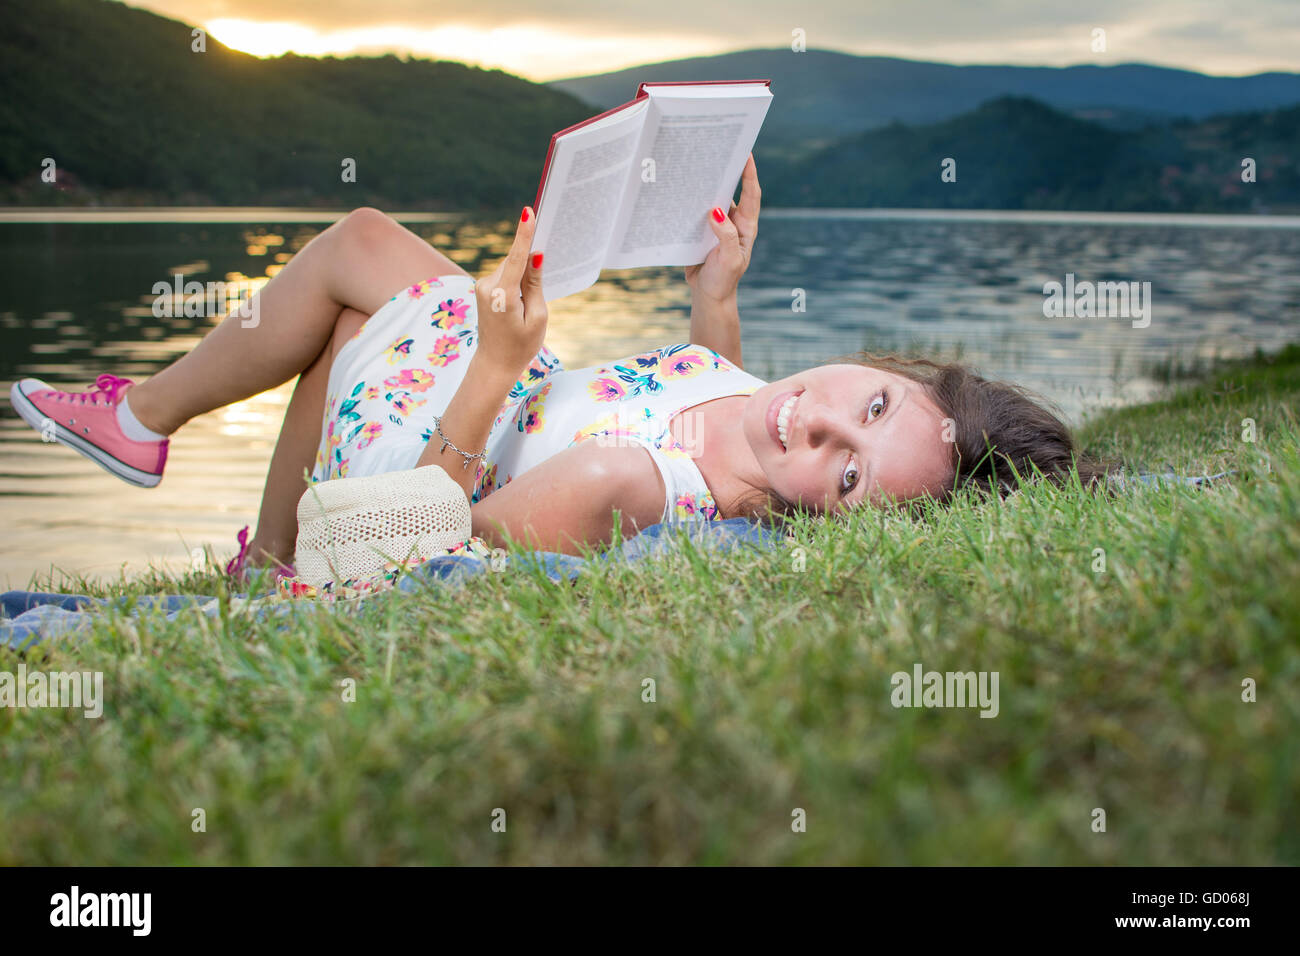 Young woman reading a book by the lake. Solo relaxation Stock Photo